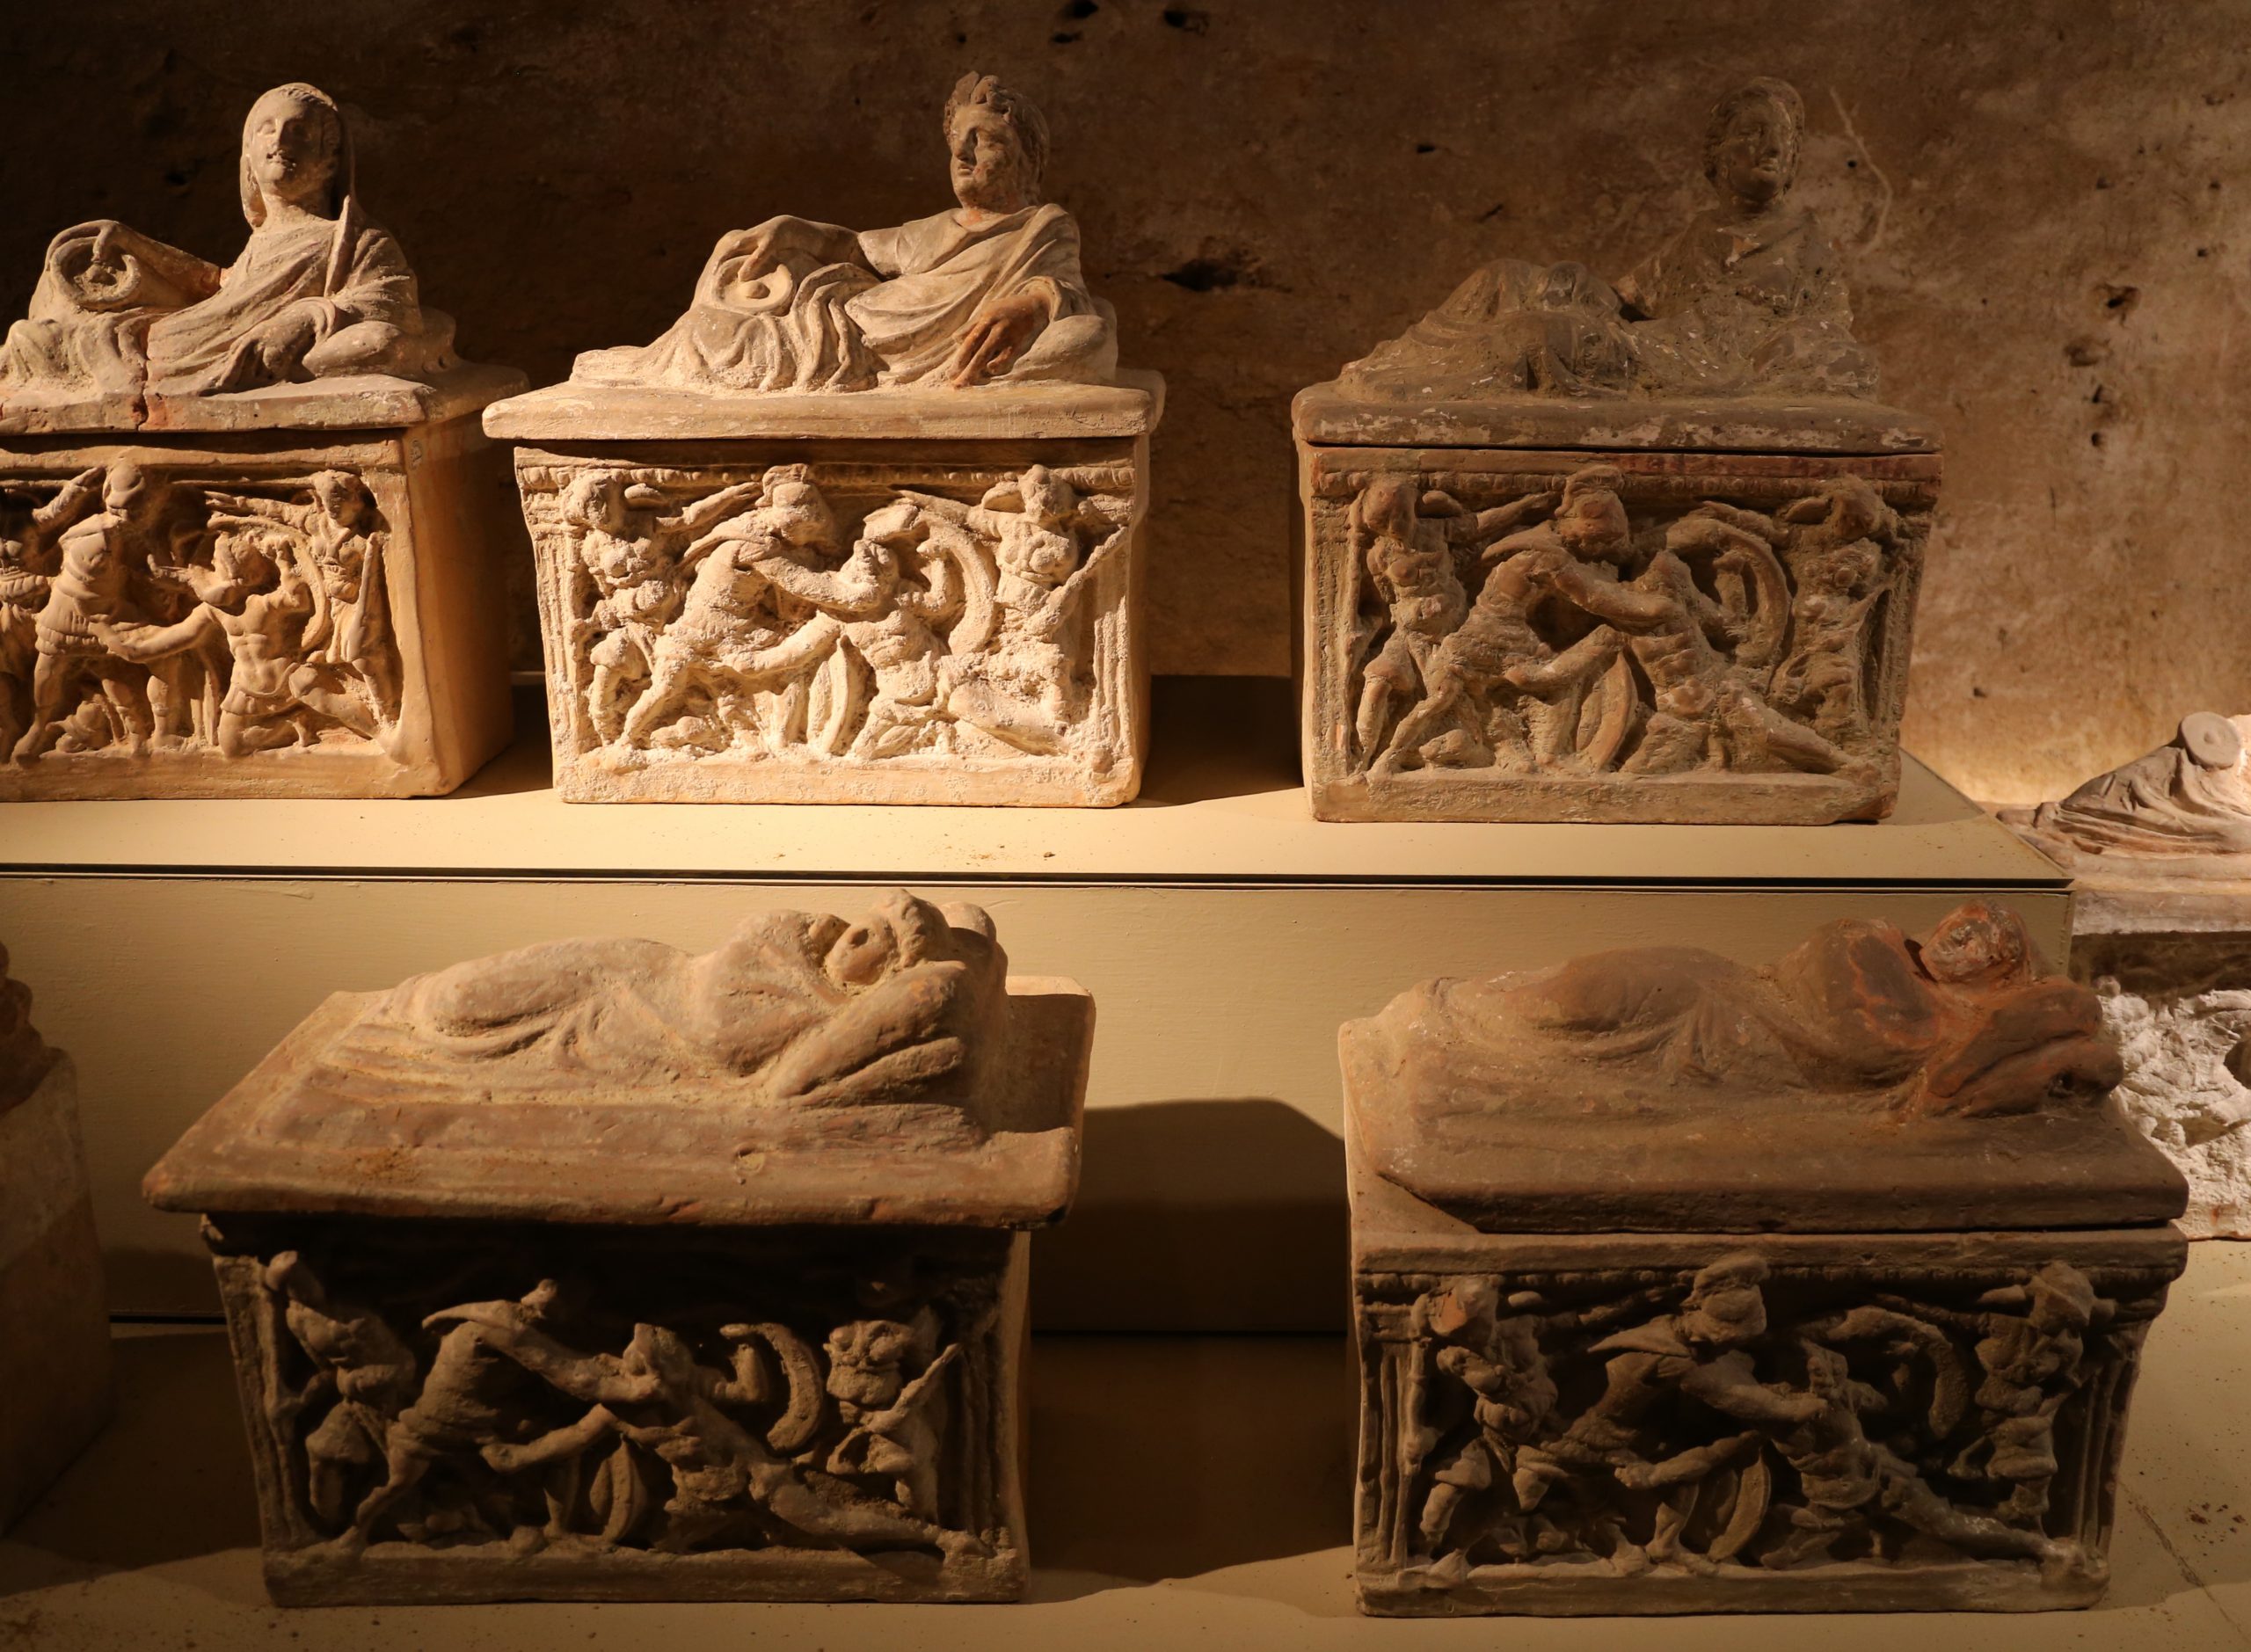 5 rectangular box-shaped funerary urns, each decorated on the side with near-identical reliefs of Eteocles and Polynices fighting. The lids of the earns are decorated with sculptures of the deceased reclining.